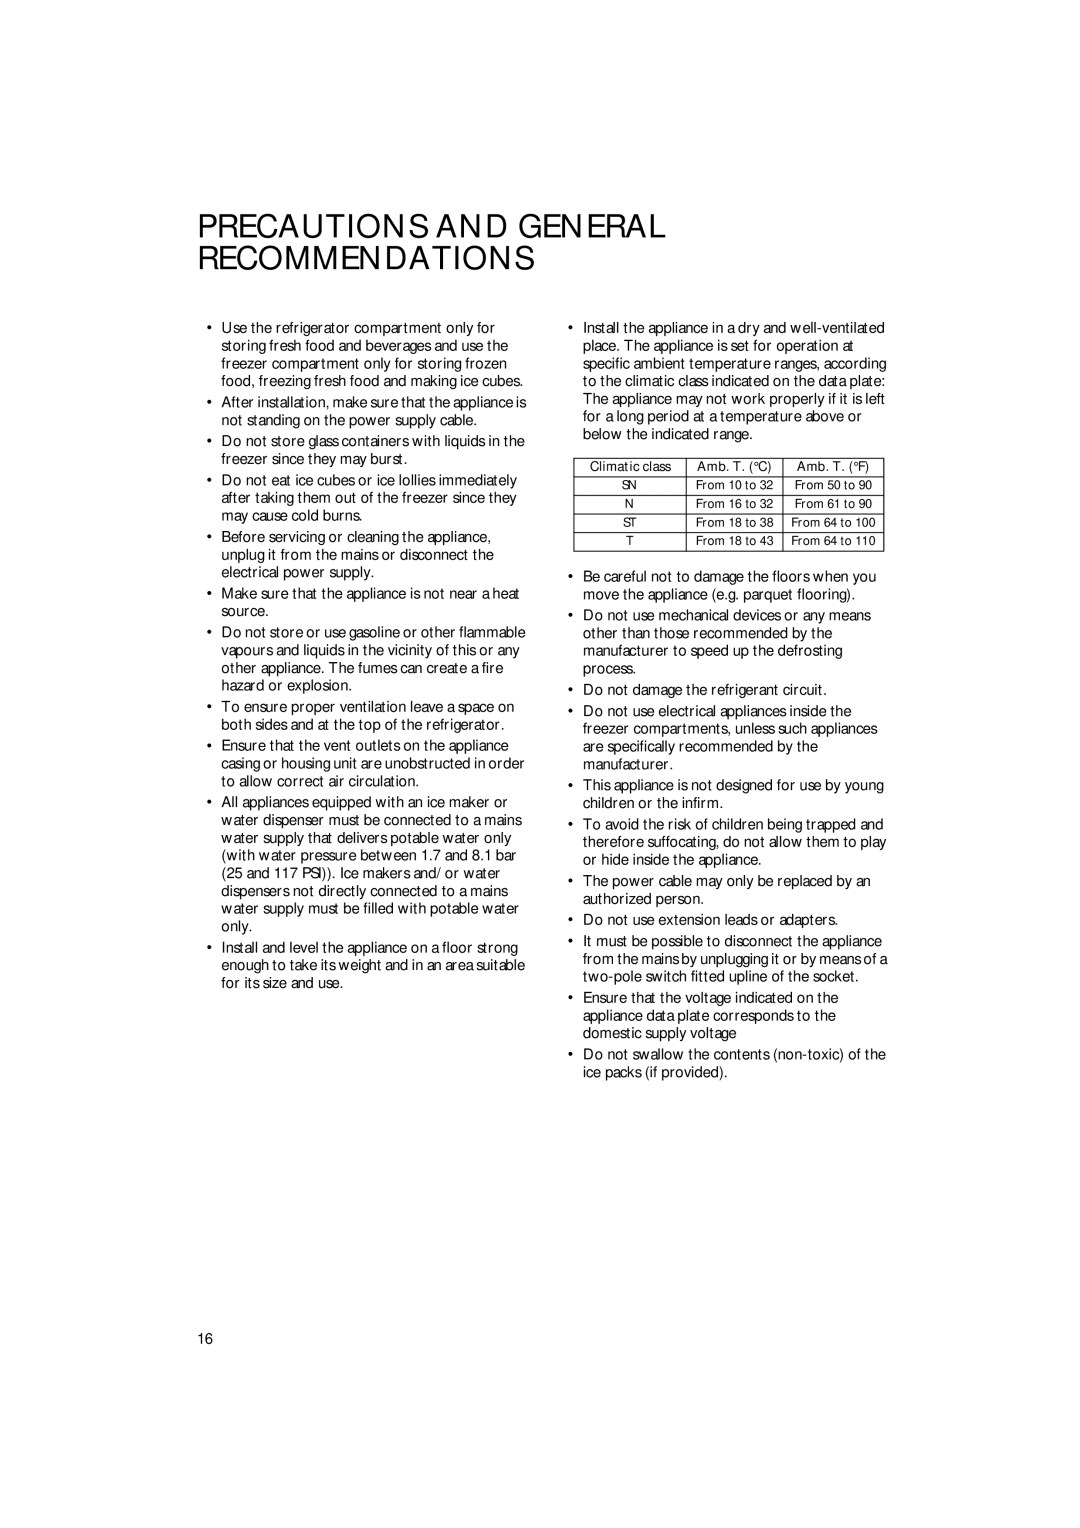 Smeg FR220A1 manual Precautions And General Recommendations, Do not damage the refrigerant circuit 